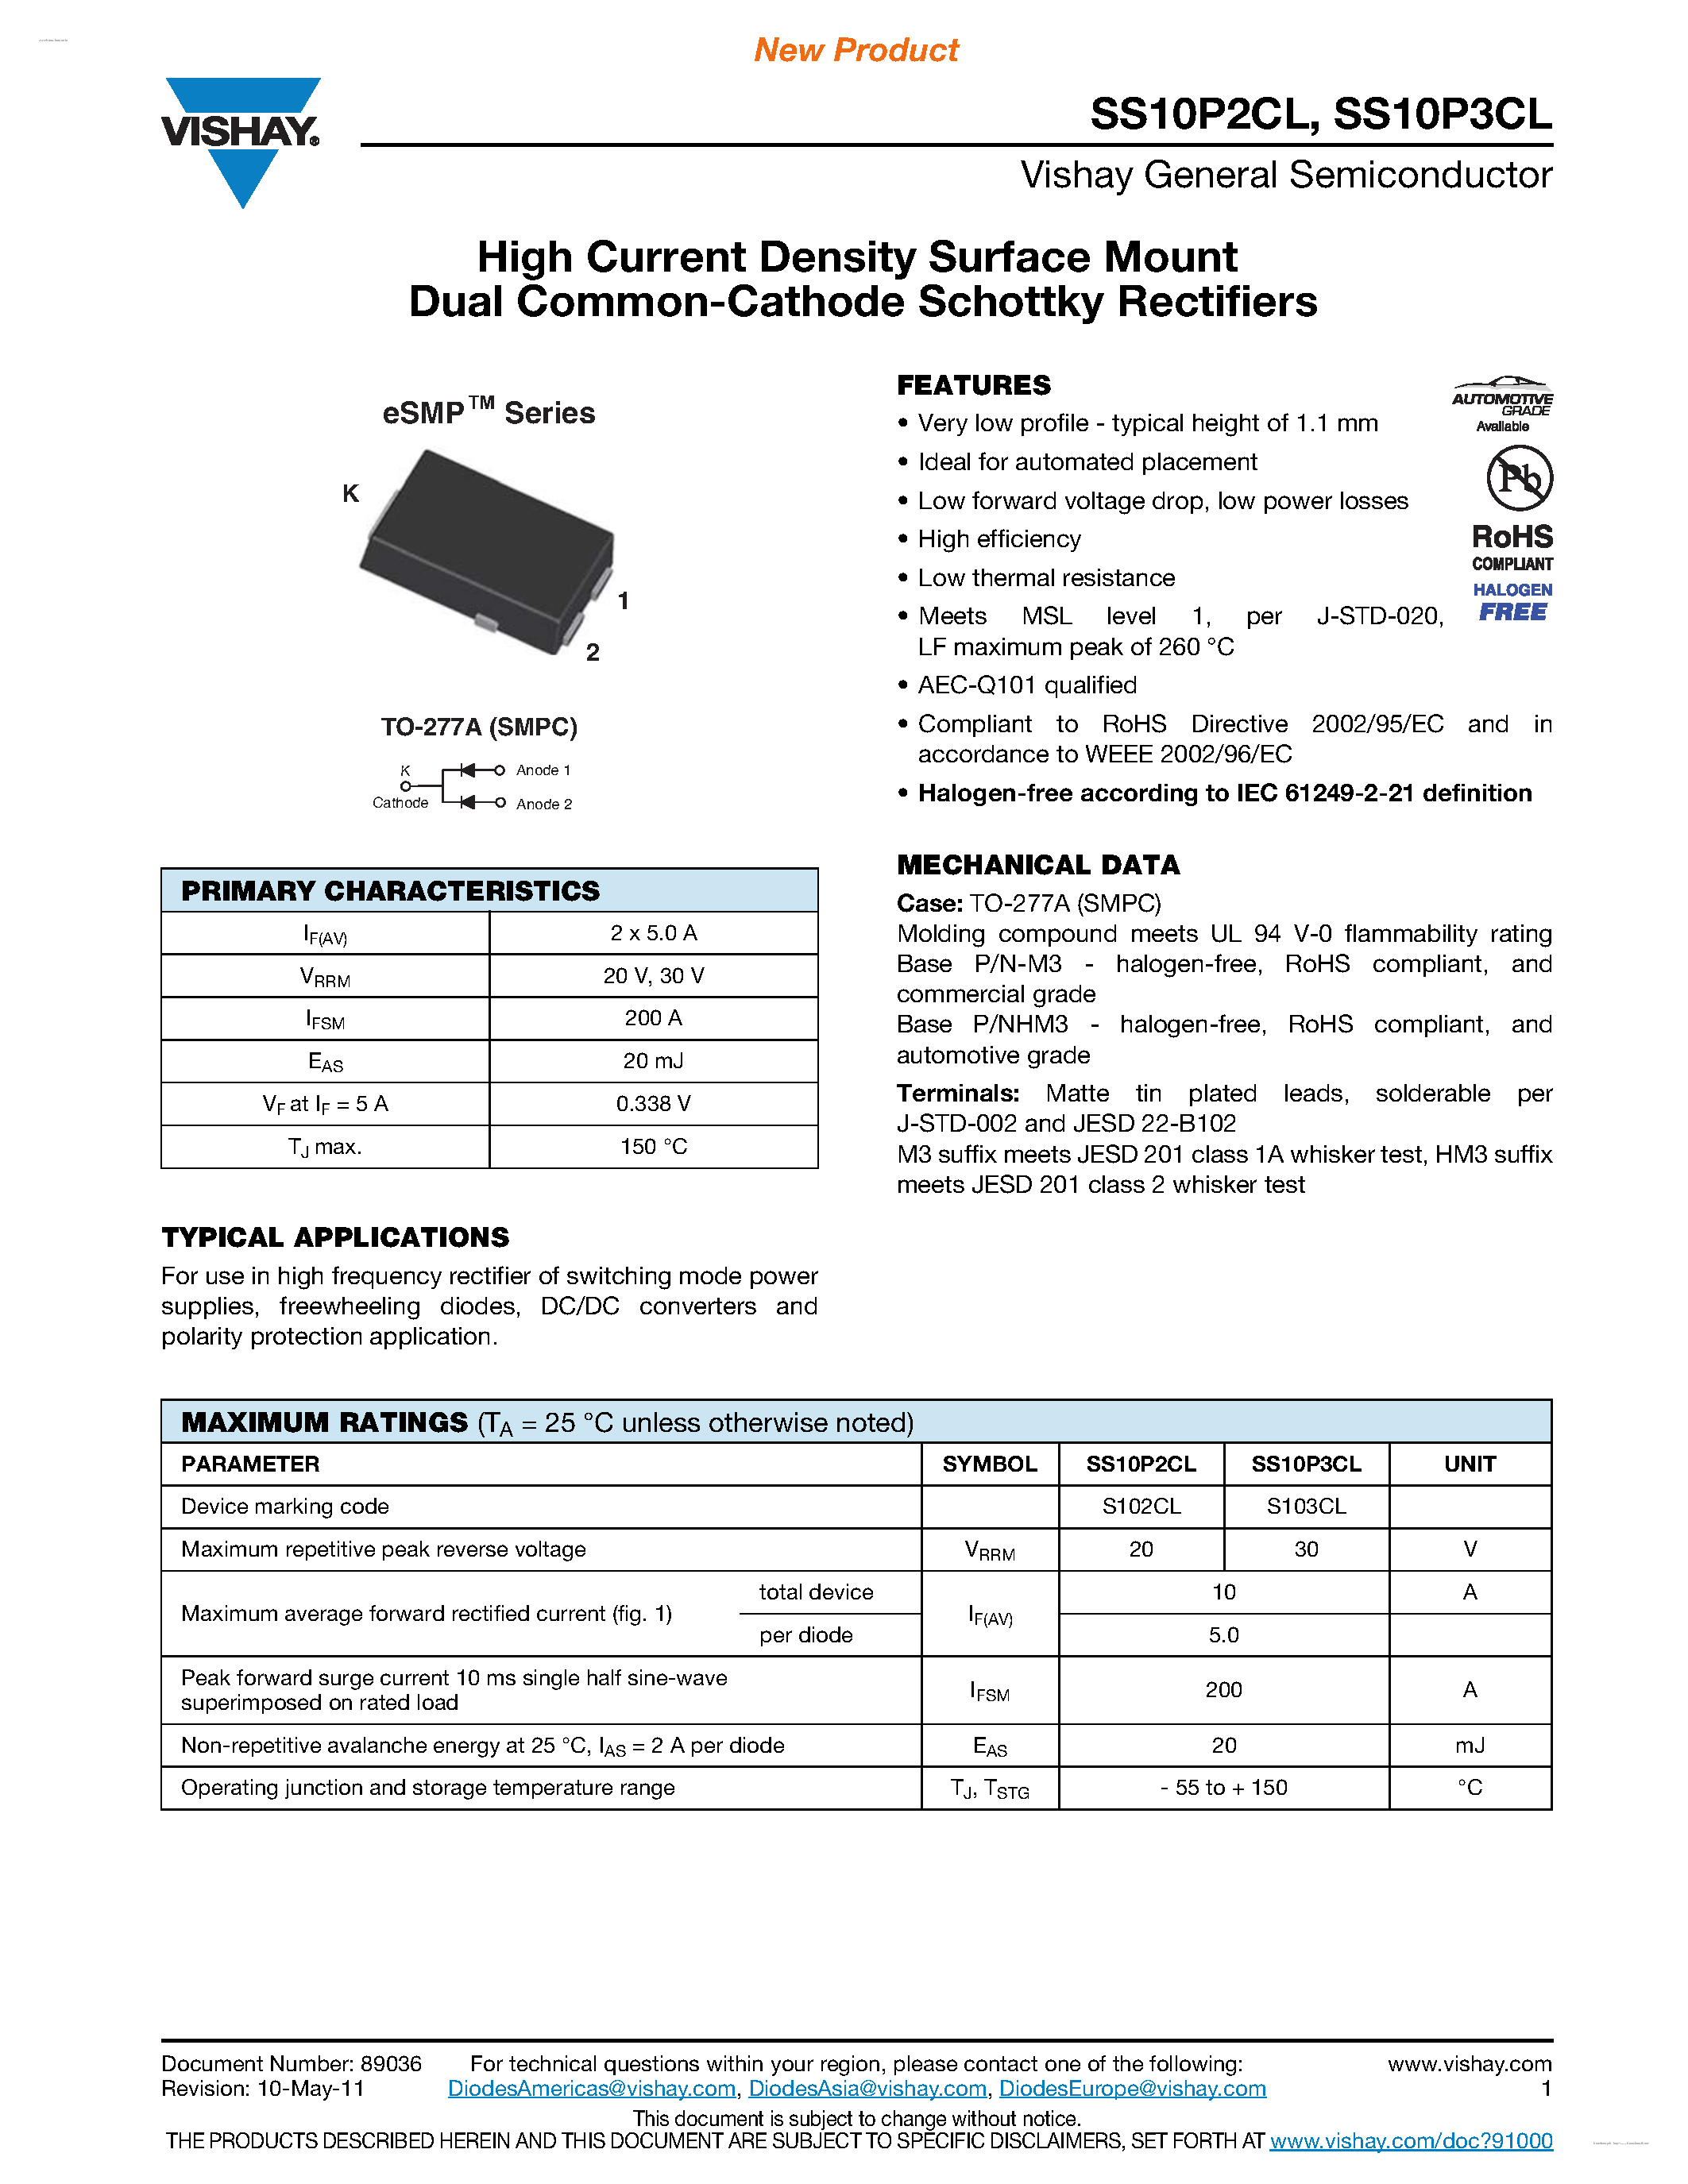 Datasheet SS10P2CL - (SS10P2CL / SS10P3CL) High Current Density Surface Mount Dual Common-Cathode Schottky Rectifiers page 1